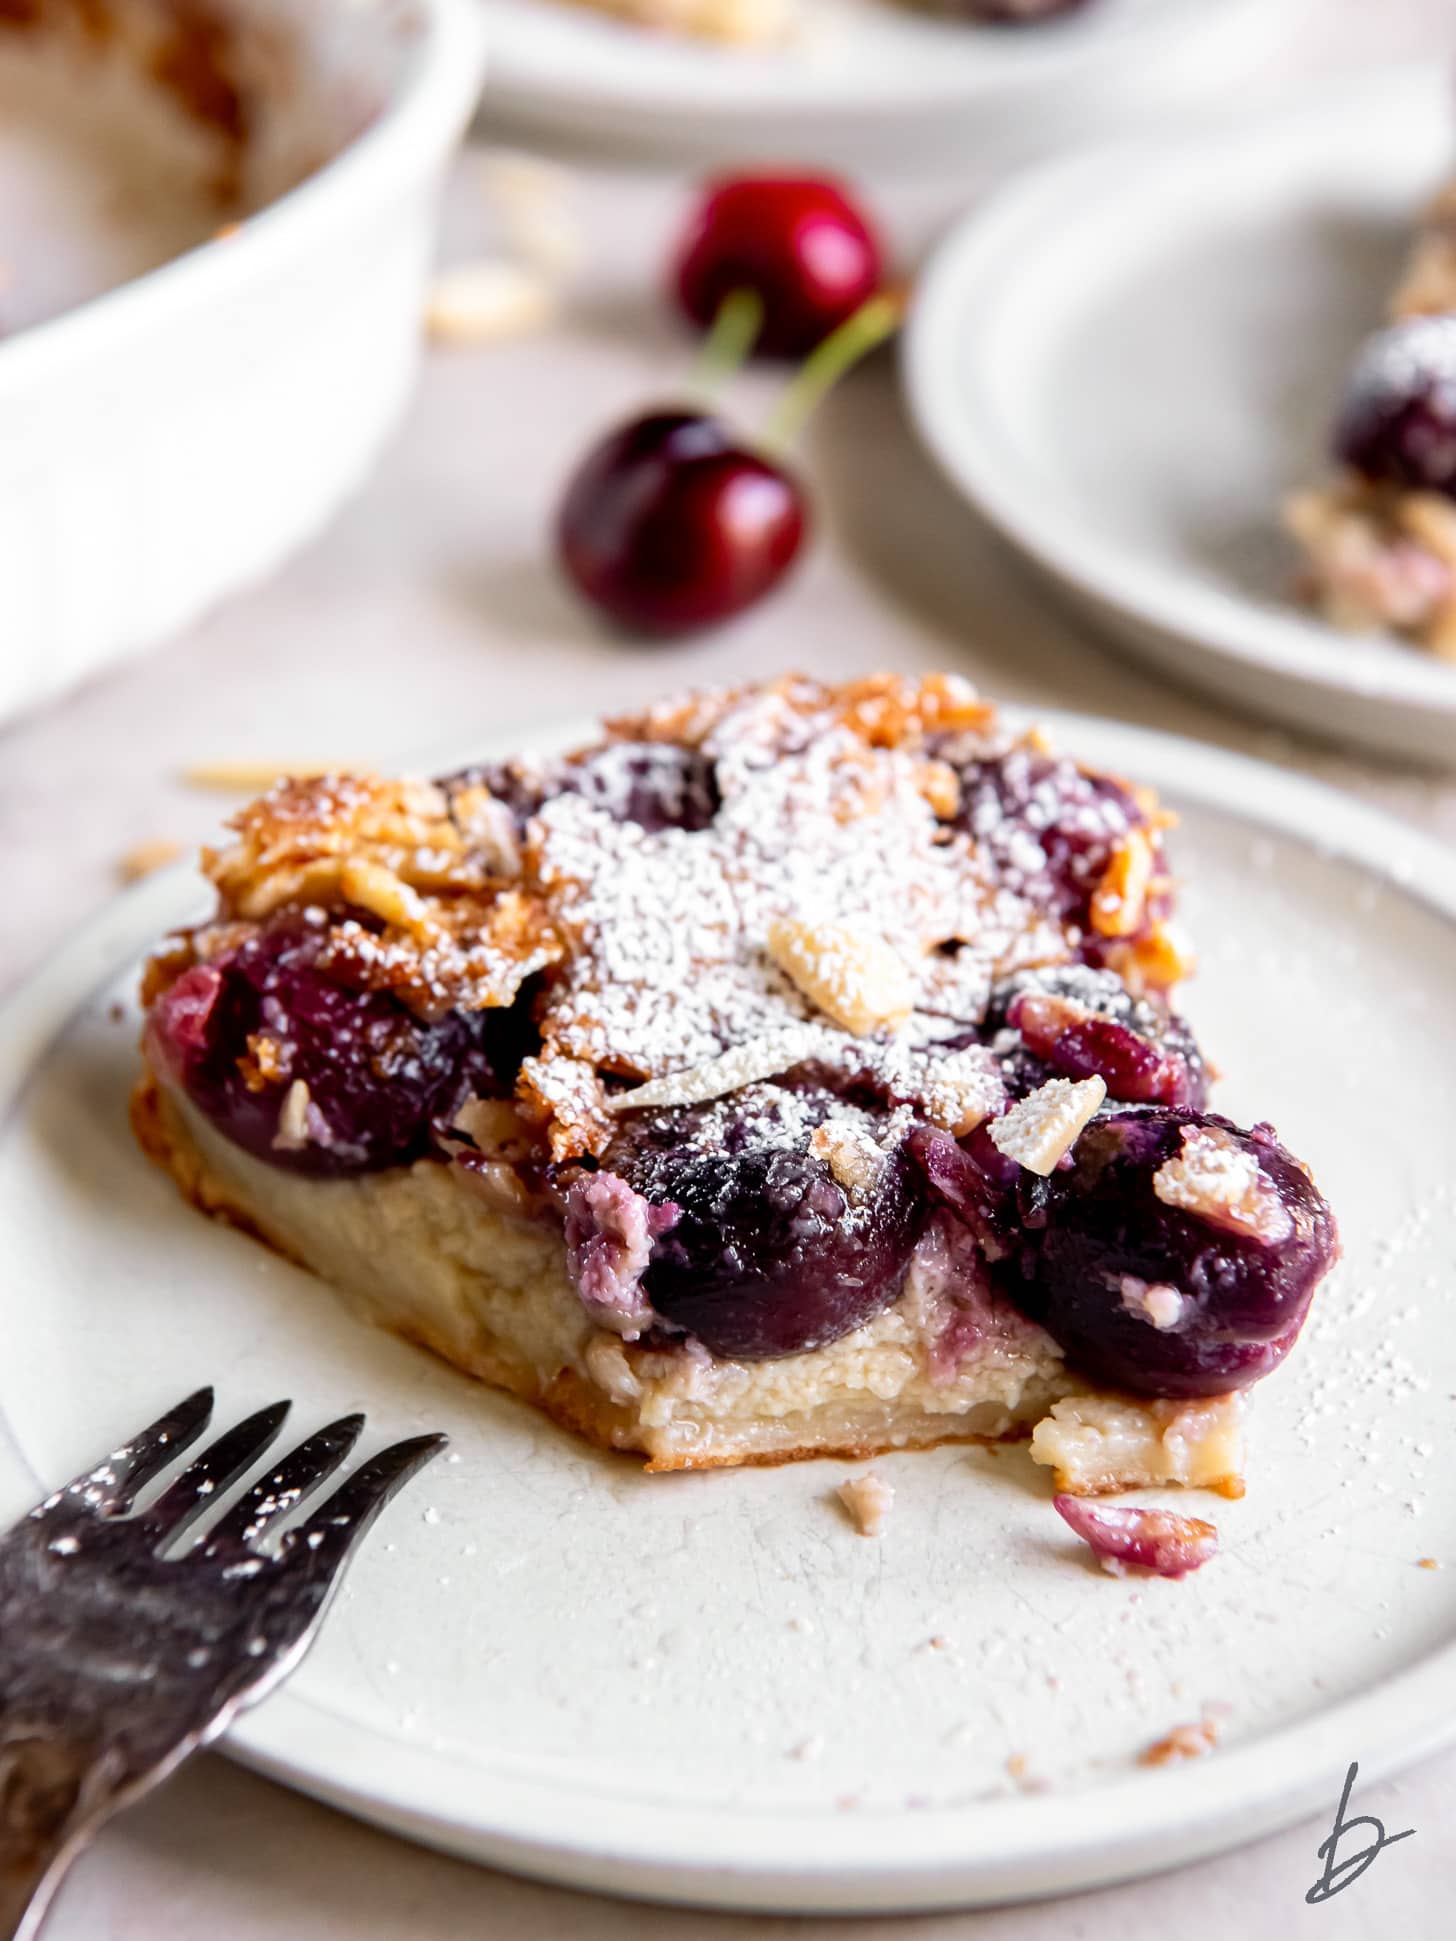 plate with a slice of cherry clafoutis with a bite taken to show juicy cherries inside.